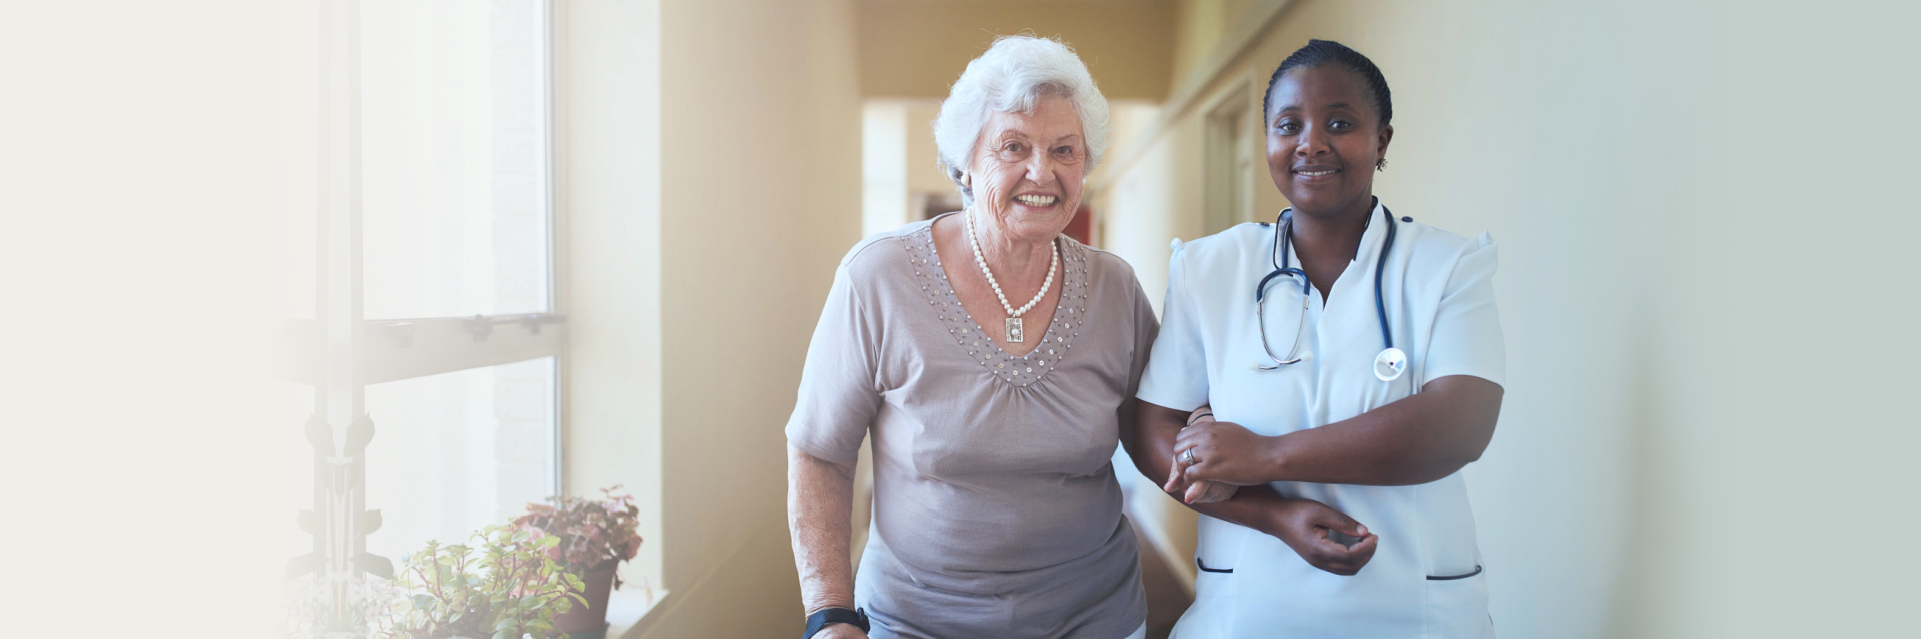 A Friendly Home Healthcare: Home Health Care in Texas